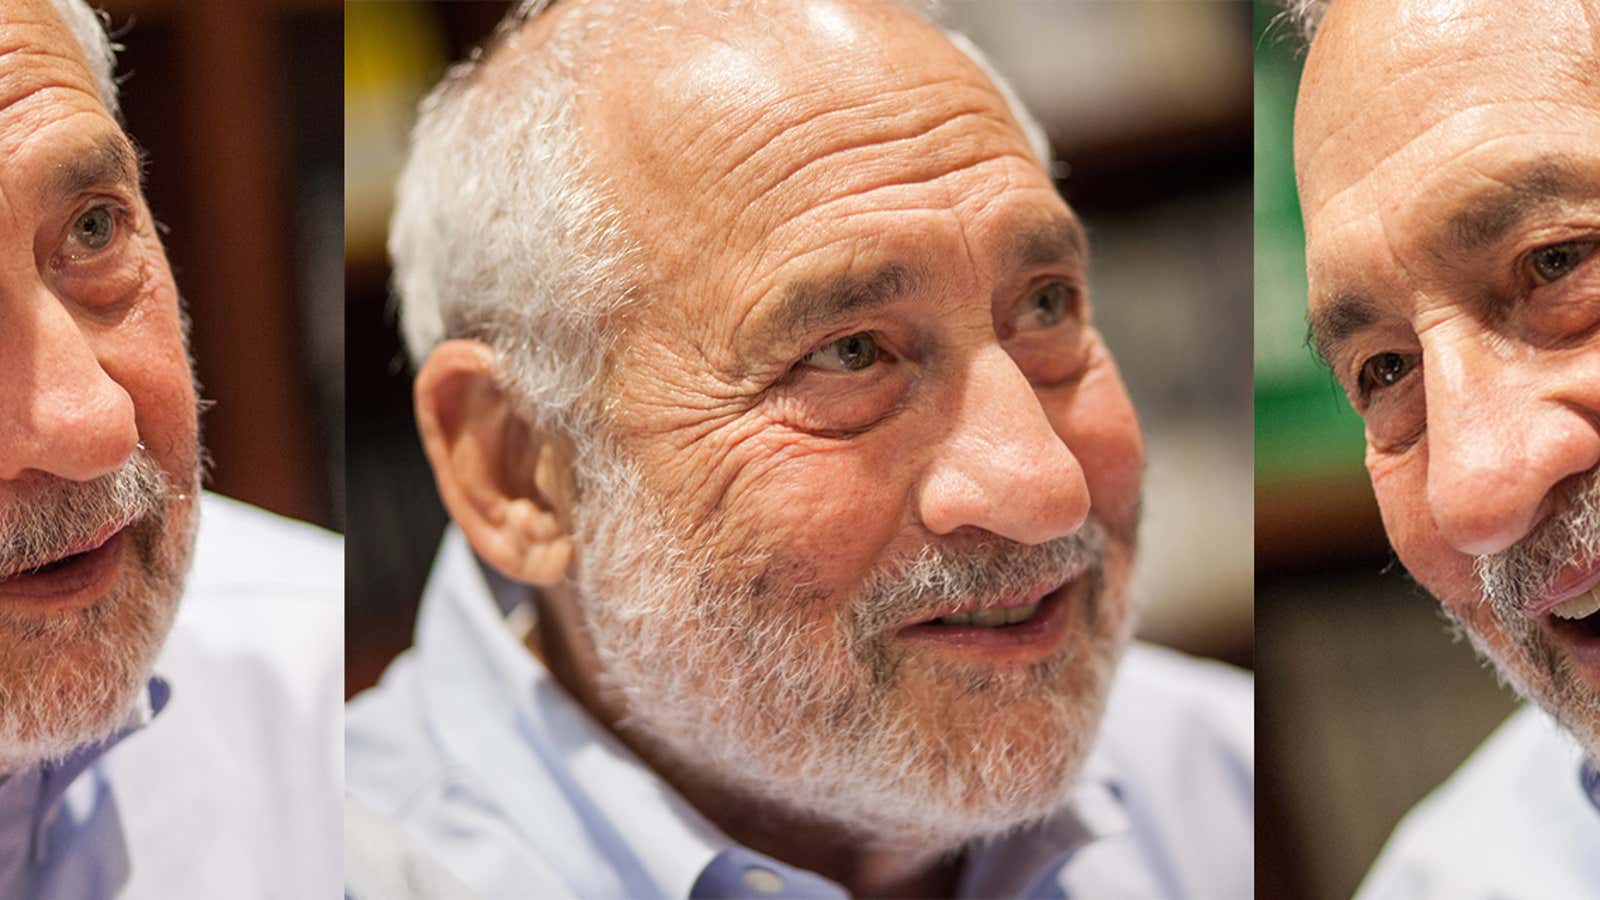 Joseph Stiglitz on Brexit, Europe’s long cycle of crisis, and why German economics is different